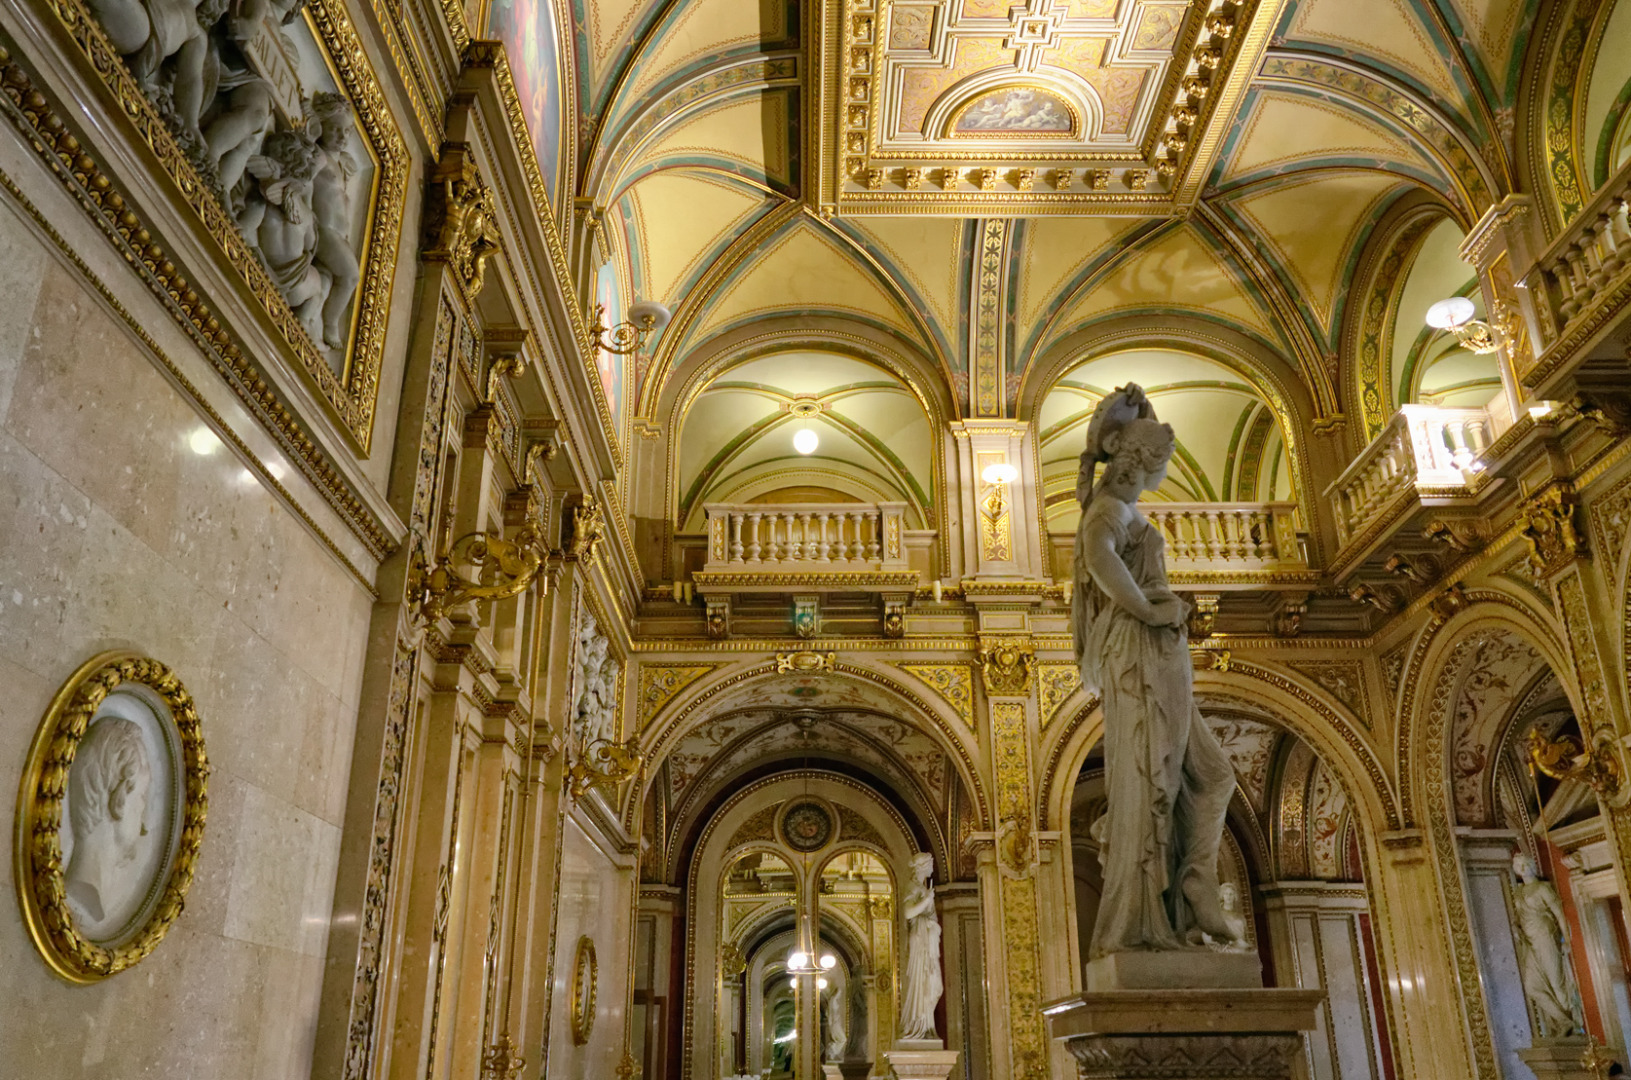 Statues on the Grand Staircase. f/4, 1/30, ISO 1600, 28mm